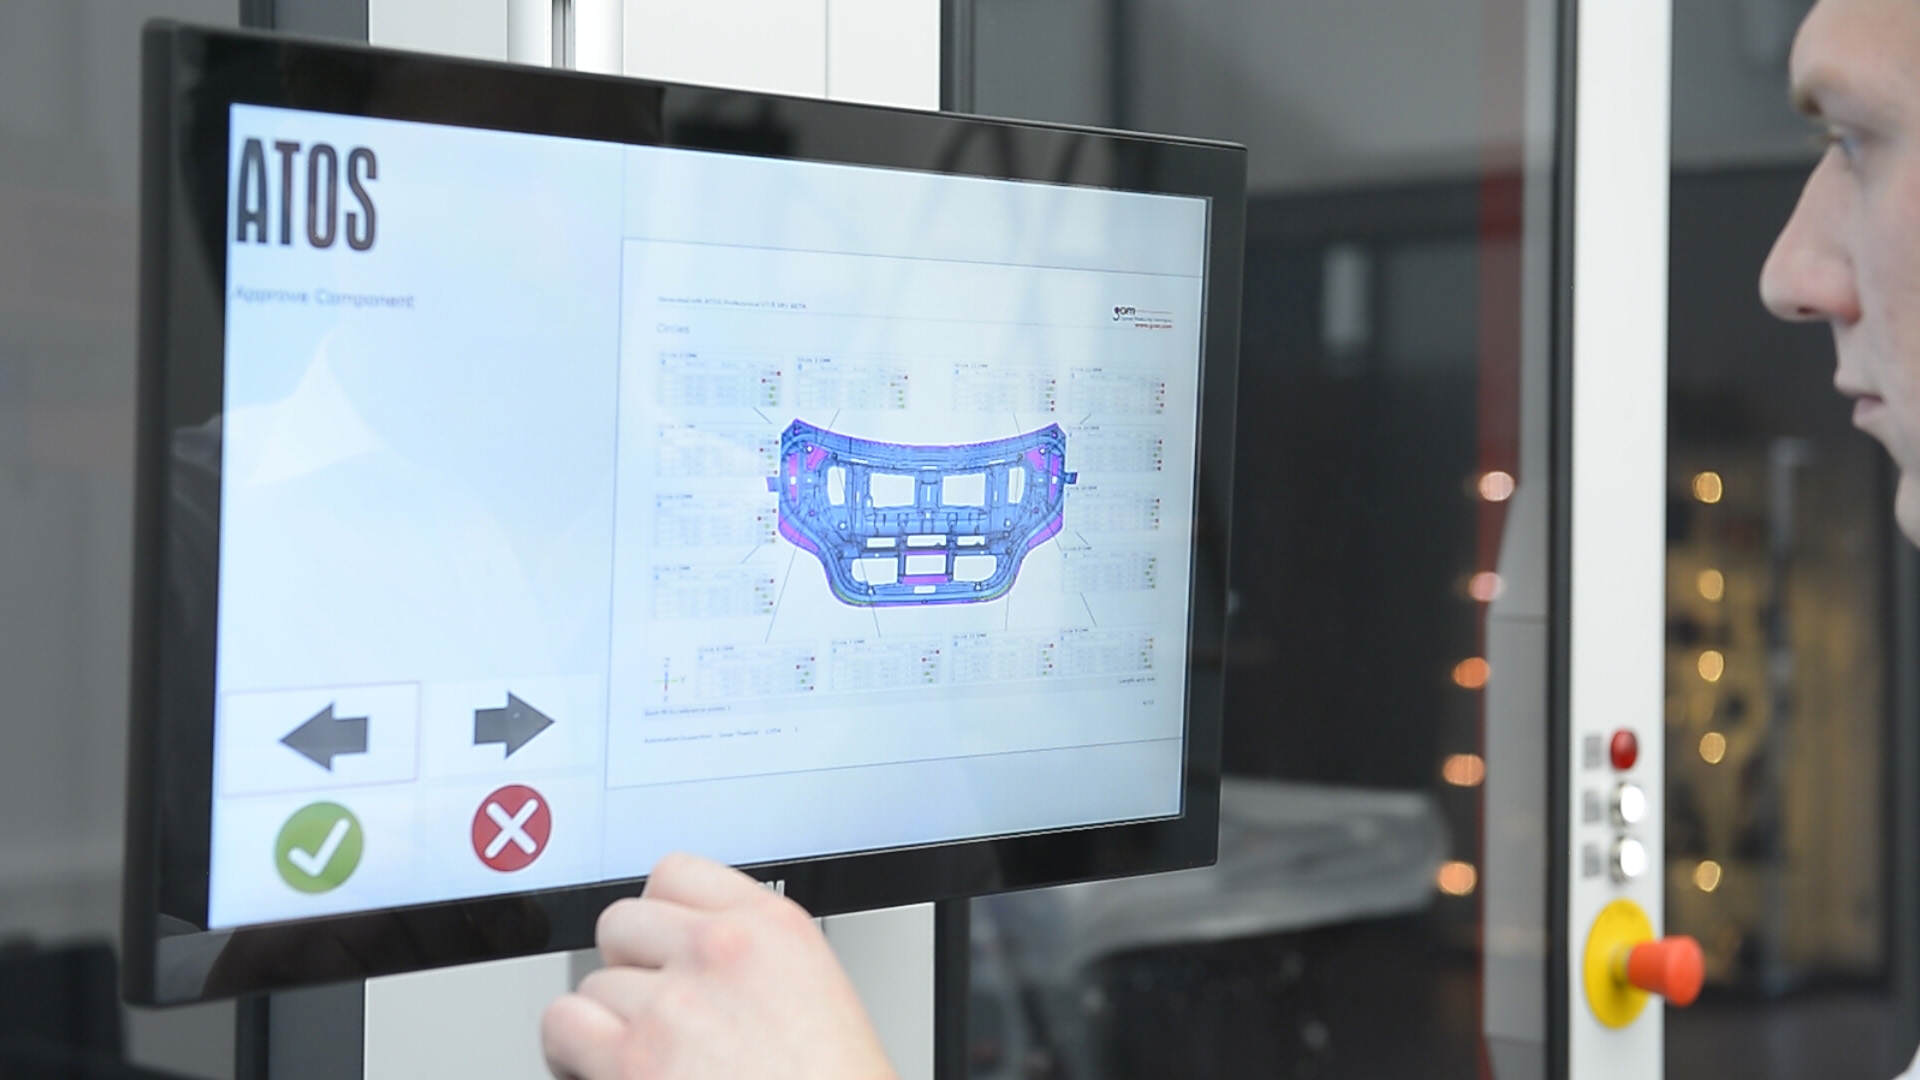 ATOS Automation - Kiosk touchscreen operation for automated 3D scanning and inspection analysis